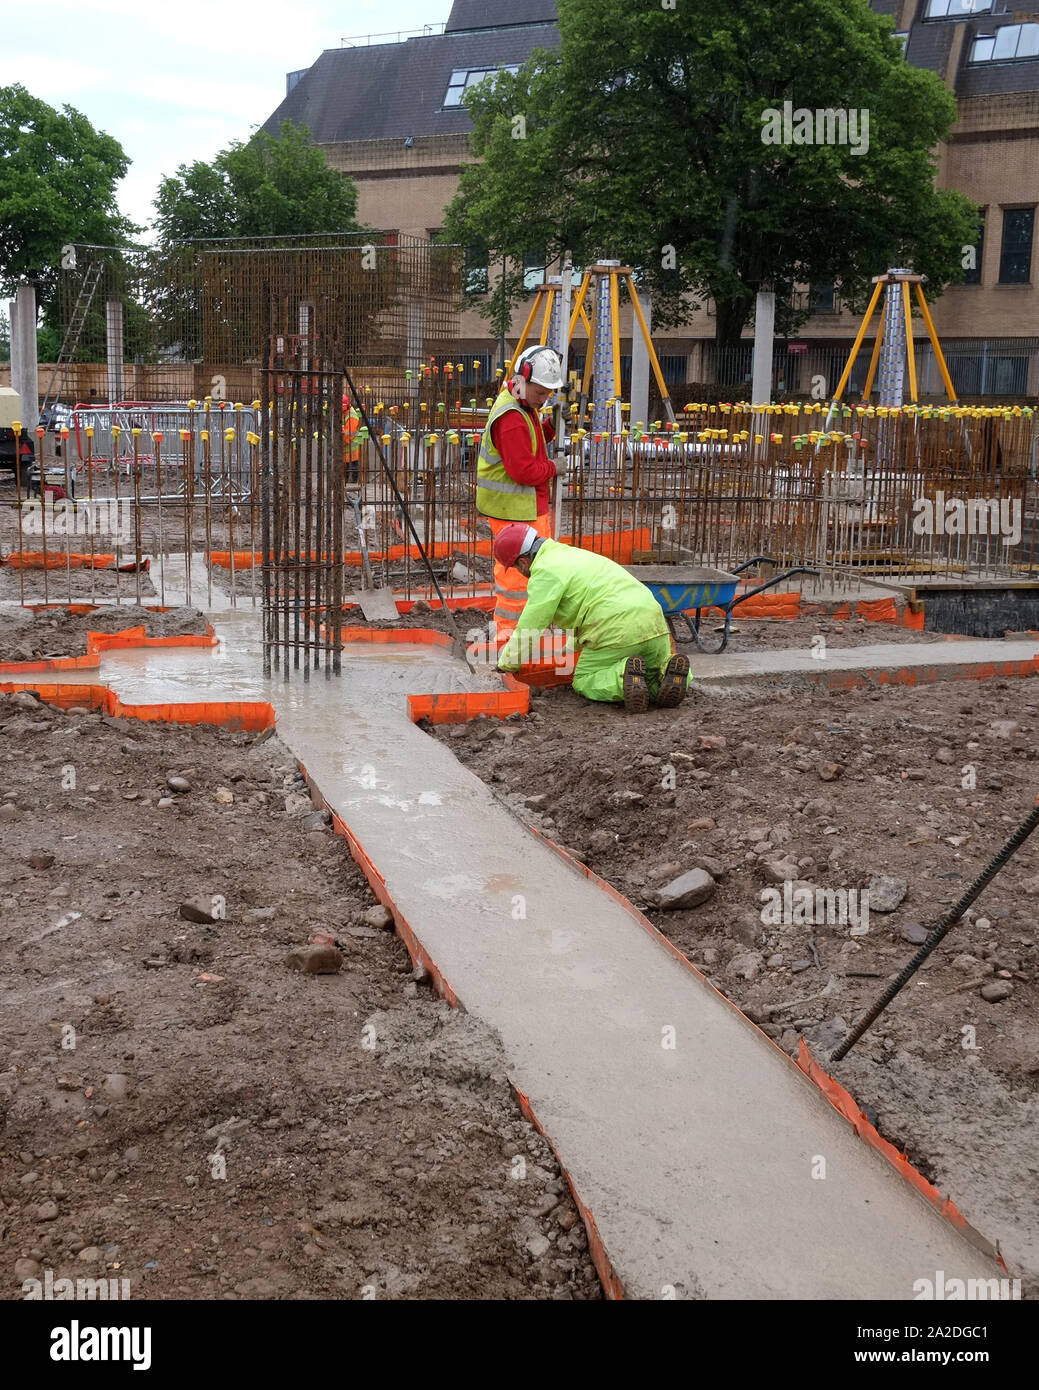 June 2016 - Construction work in progress on the base footings, Stock Photo